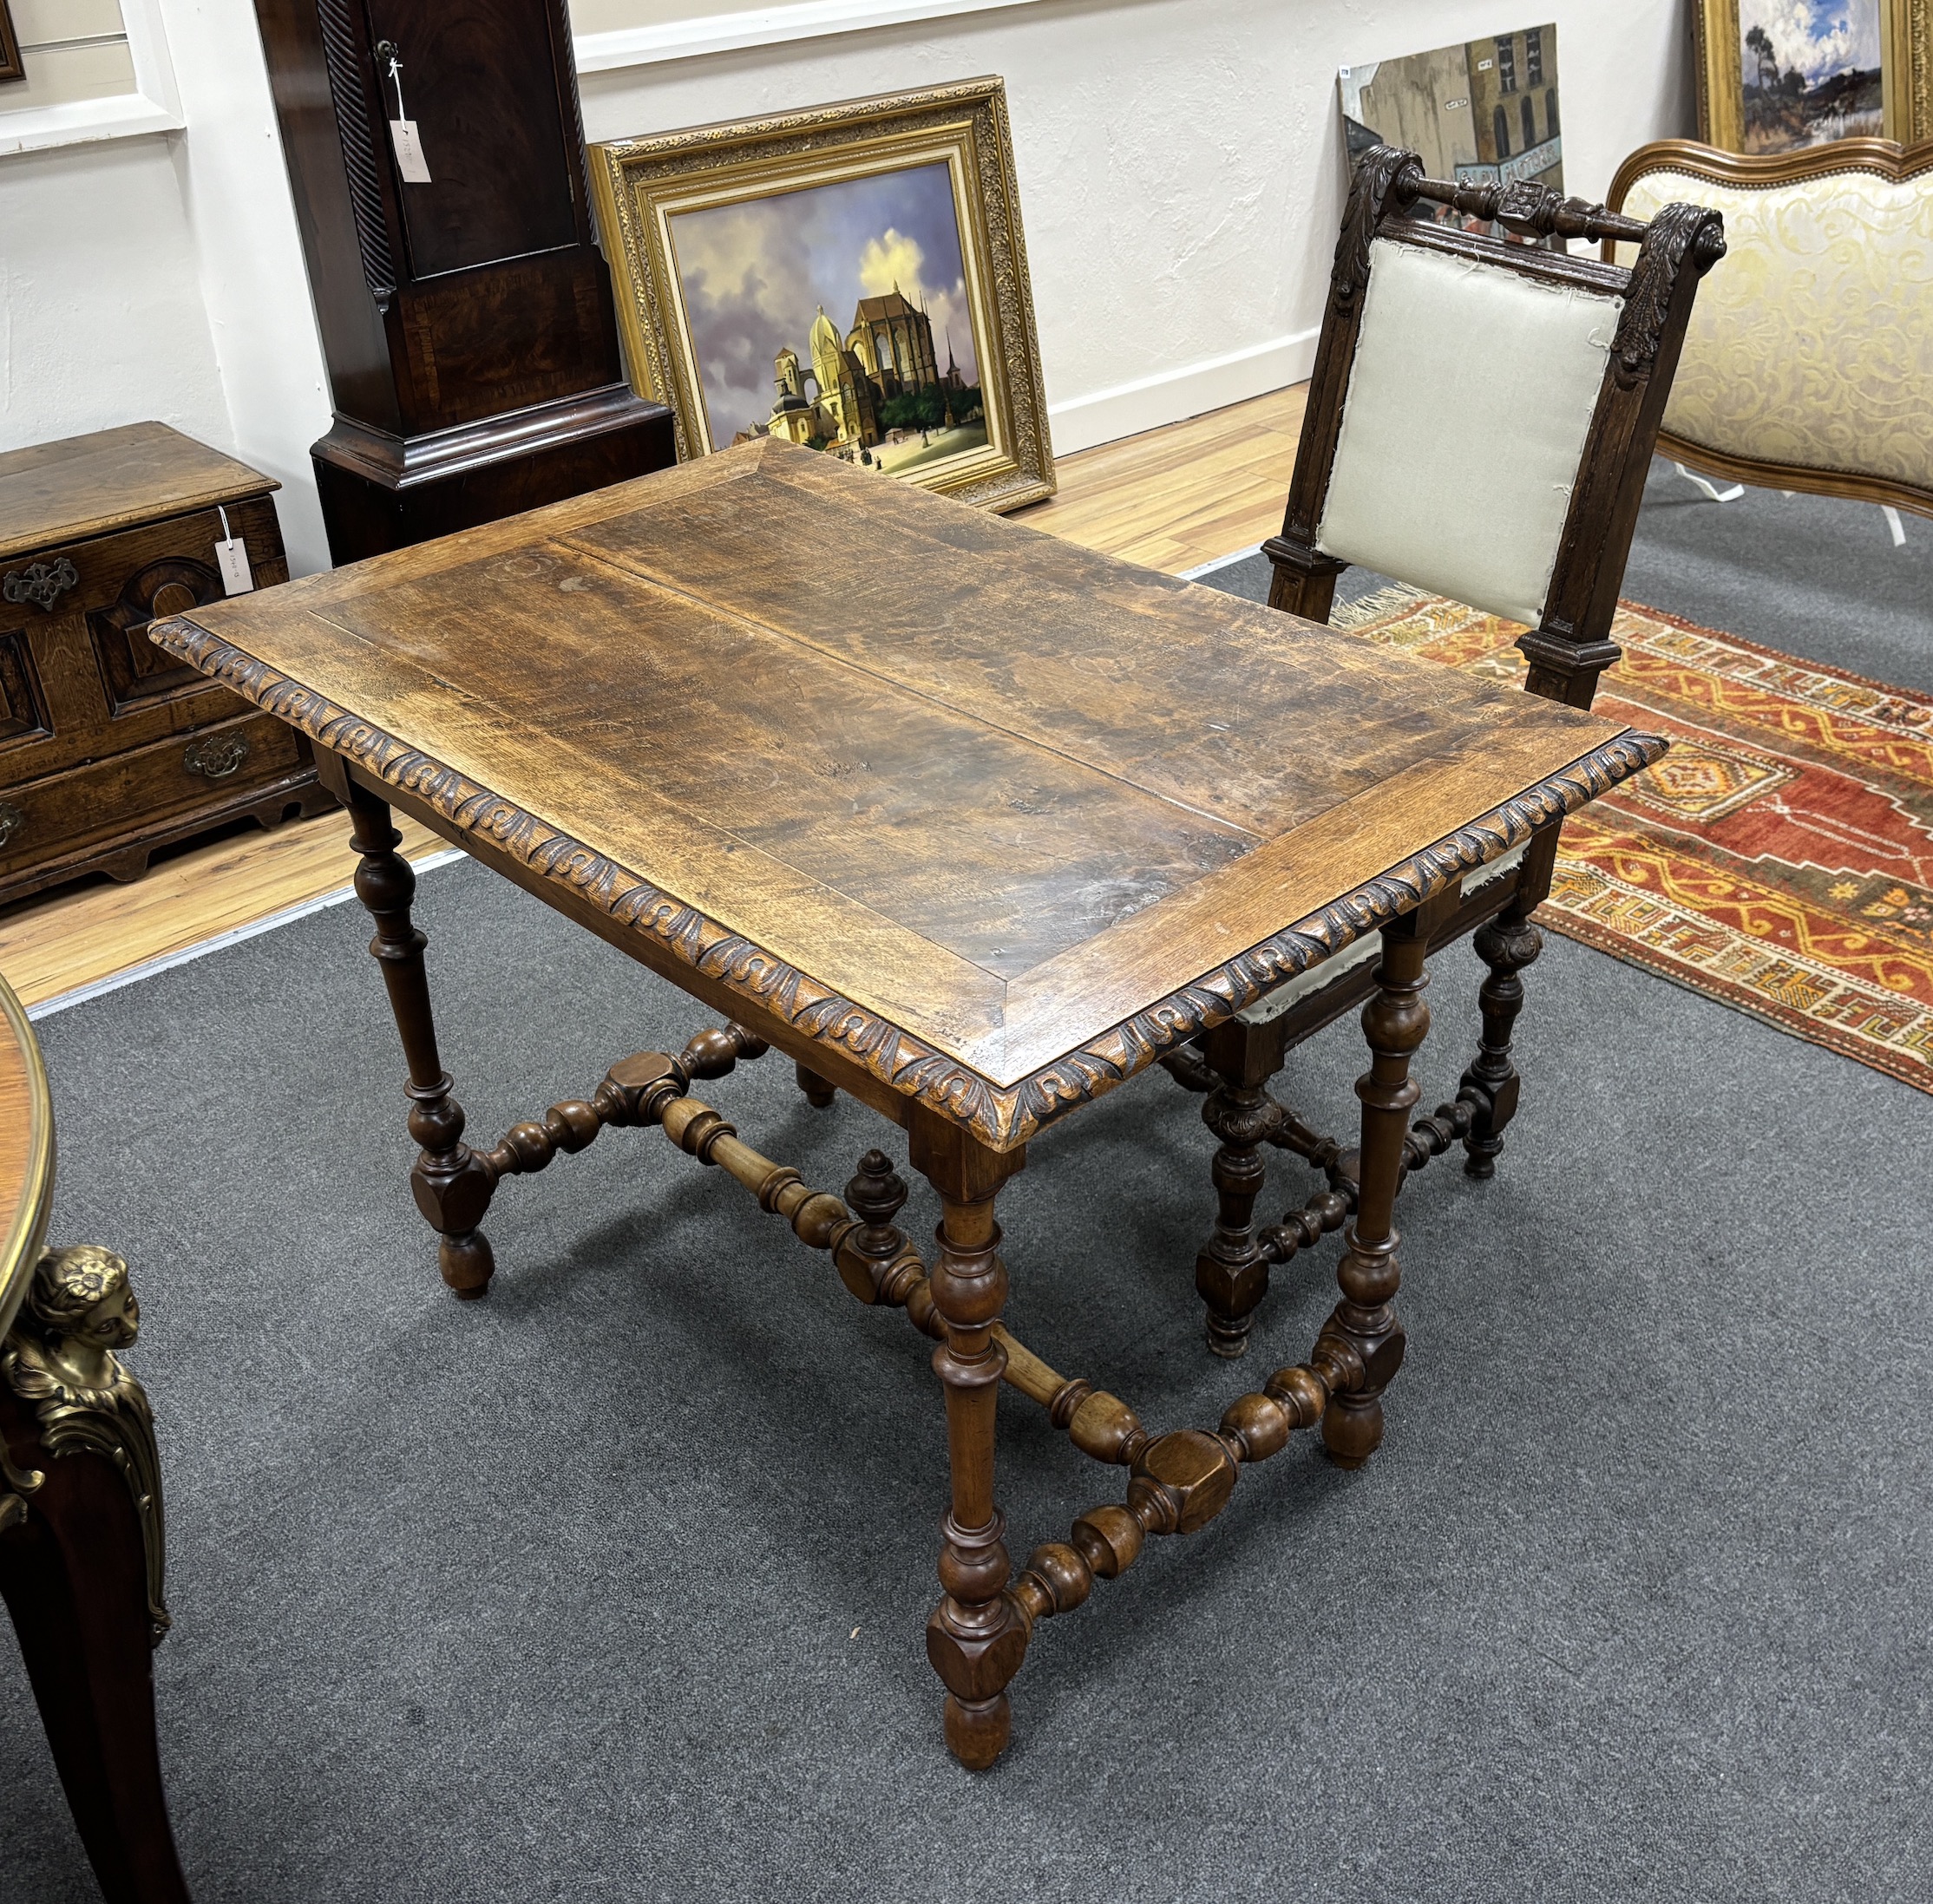 A 19th century Continental walnut side table and Flemish oak chair, table width 99cm, depth 65cm, height 71cm                                                                                                               